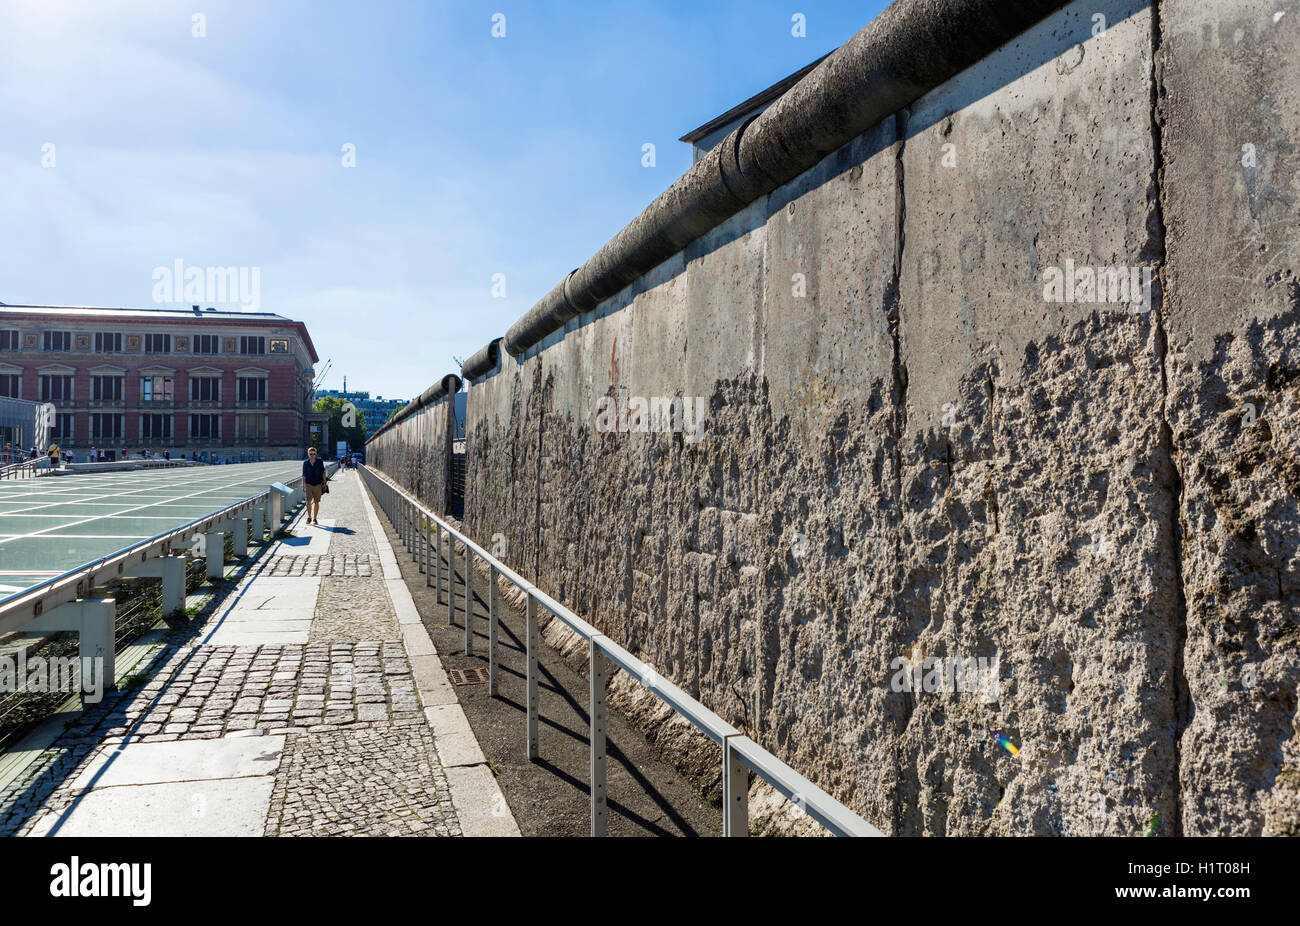 The Berlin Wall at the Topographie des Terrors museum, Niederkirchner Strasse, Mitte, Berlin, Germany Stock Photo